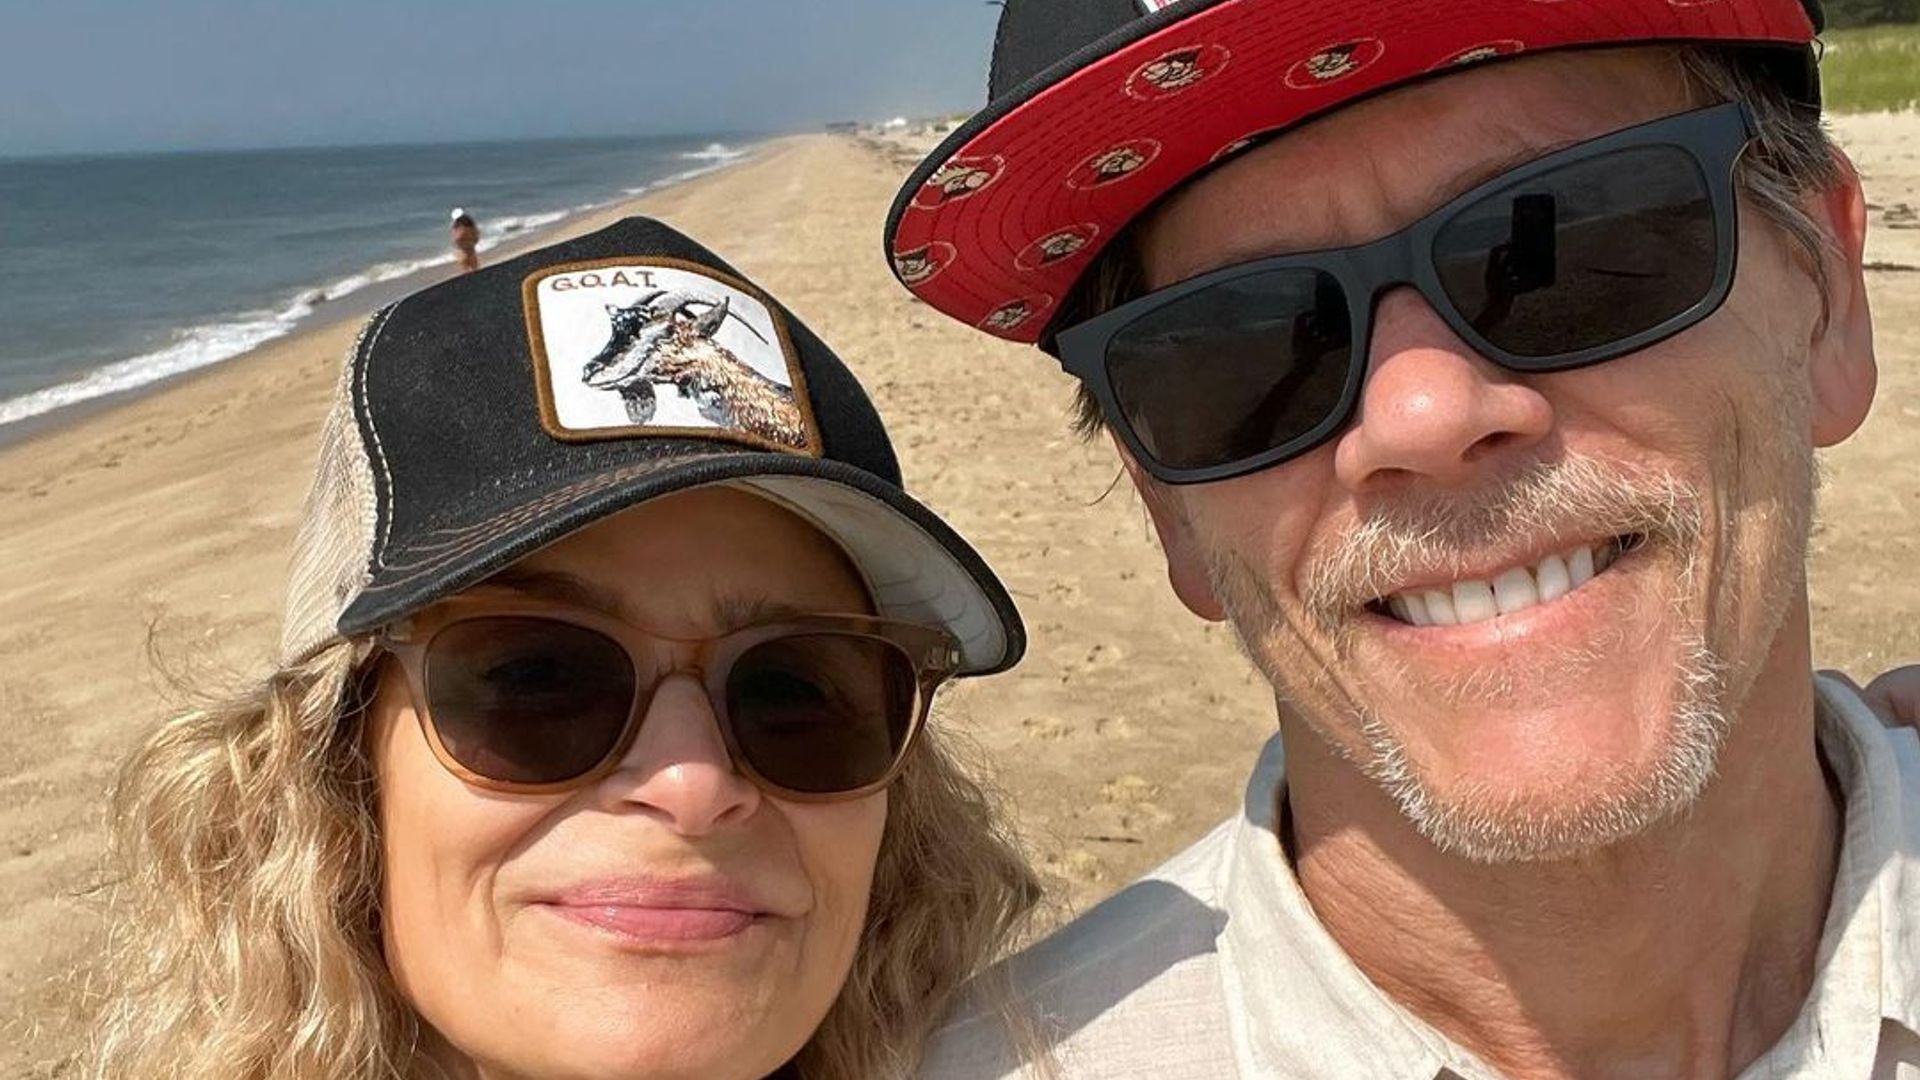 Kyra Sedgwick shows off natural beauty in makeup-free beach photo that leaves fans in awe